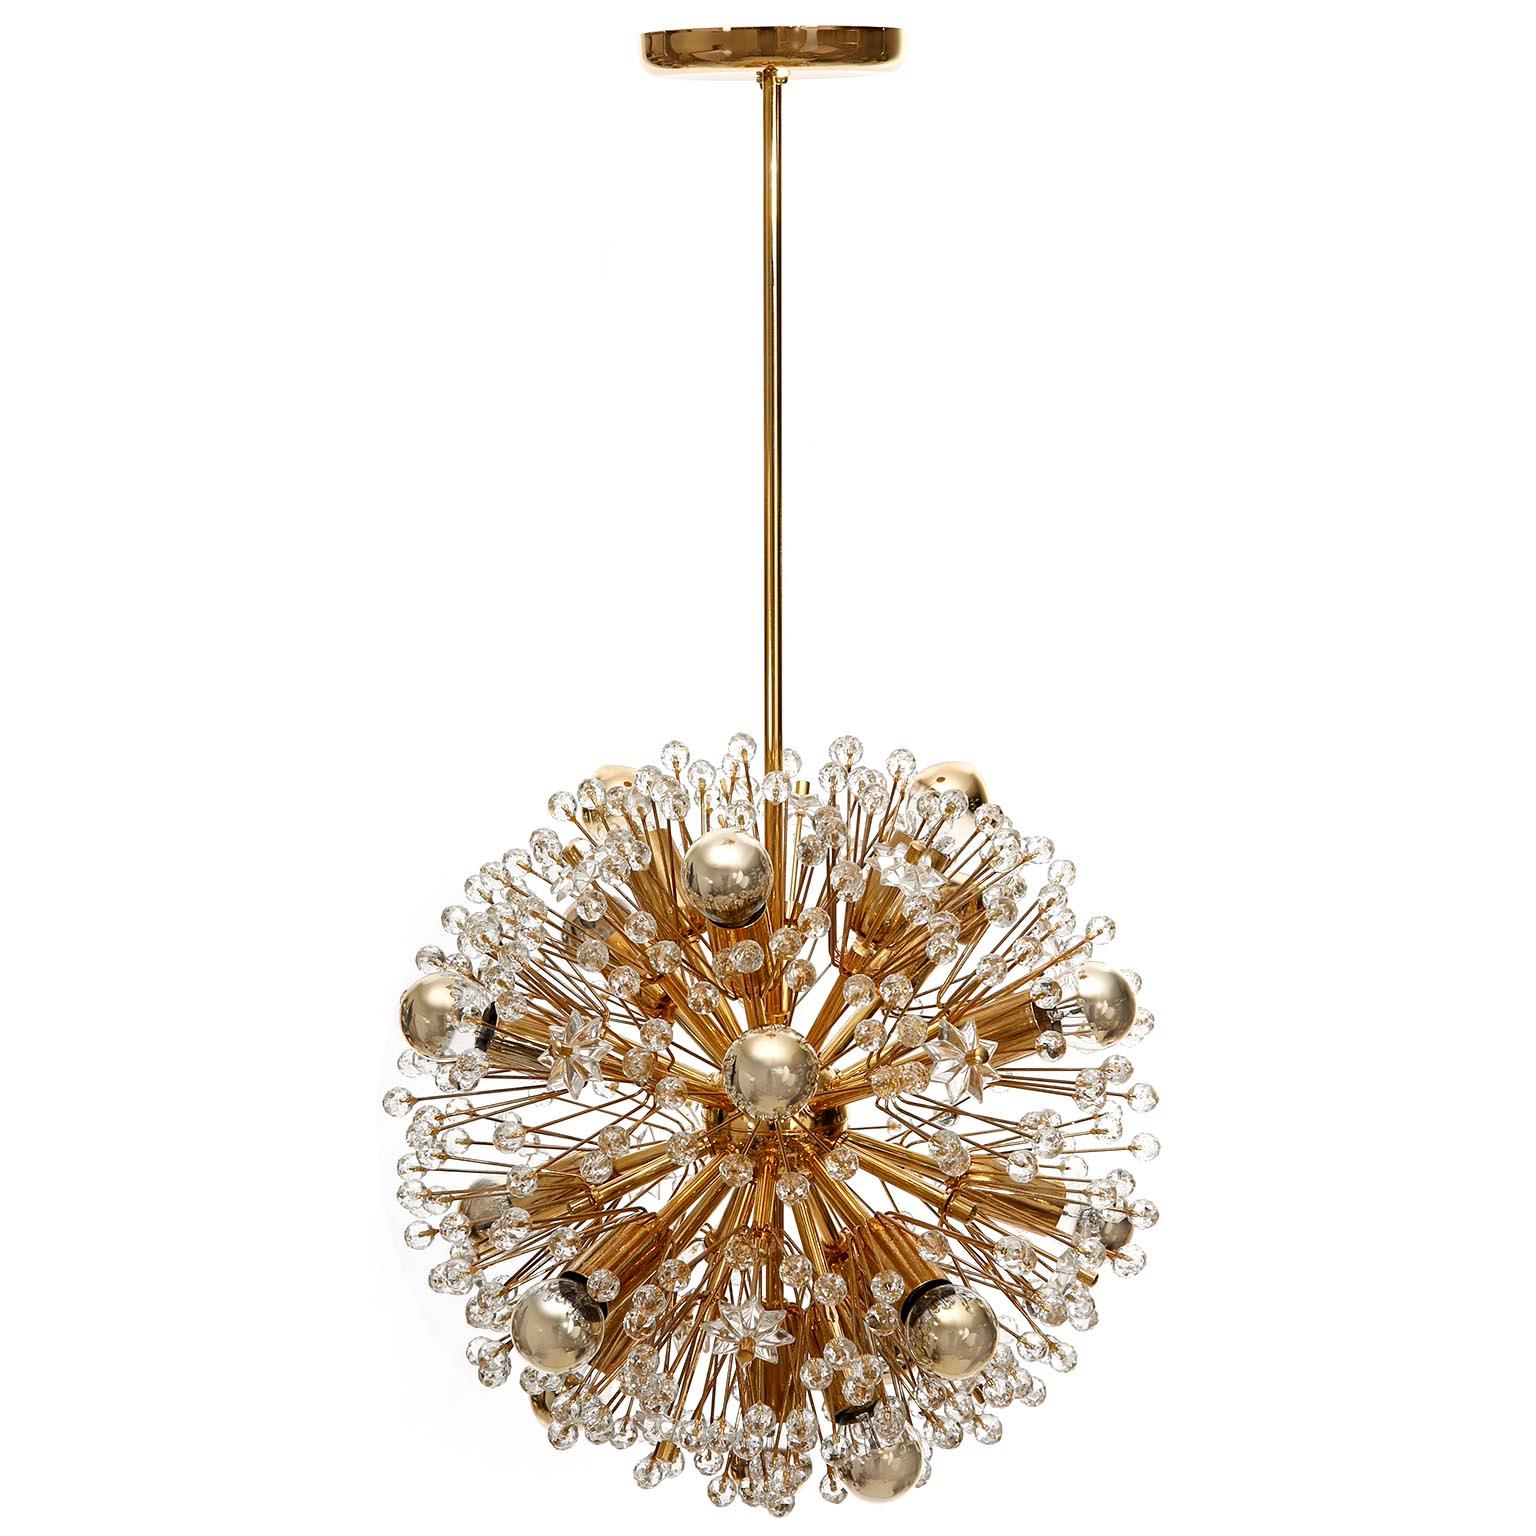 Two Sputnik chandeliers or pendants designed by Emil Stejnar and manufactured in midcentury, circa 1970.
This beautiful light fixture is made of a 24-carat gold-plated brass frame which is decorated with cut glass in the form of beads and stars.